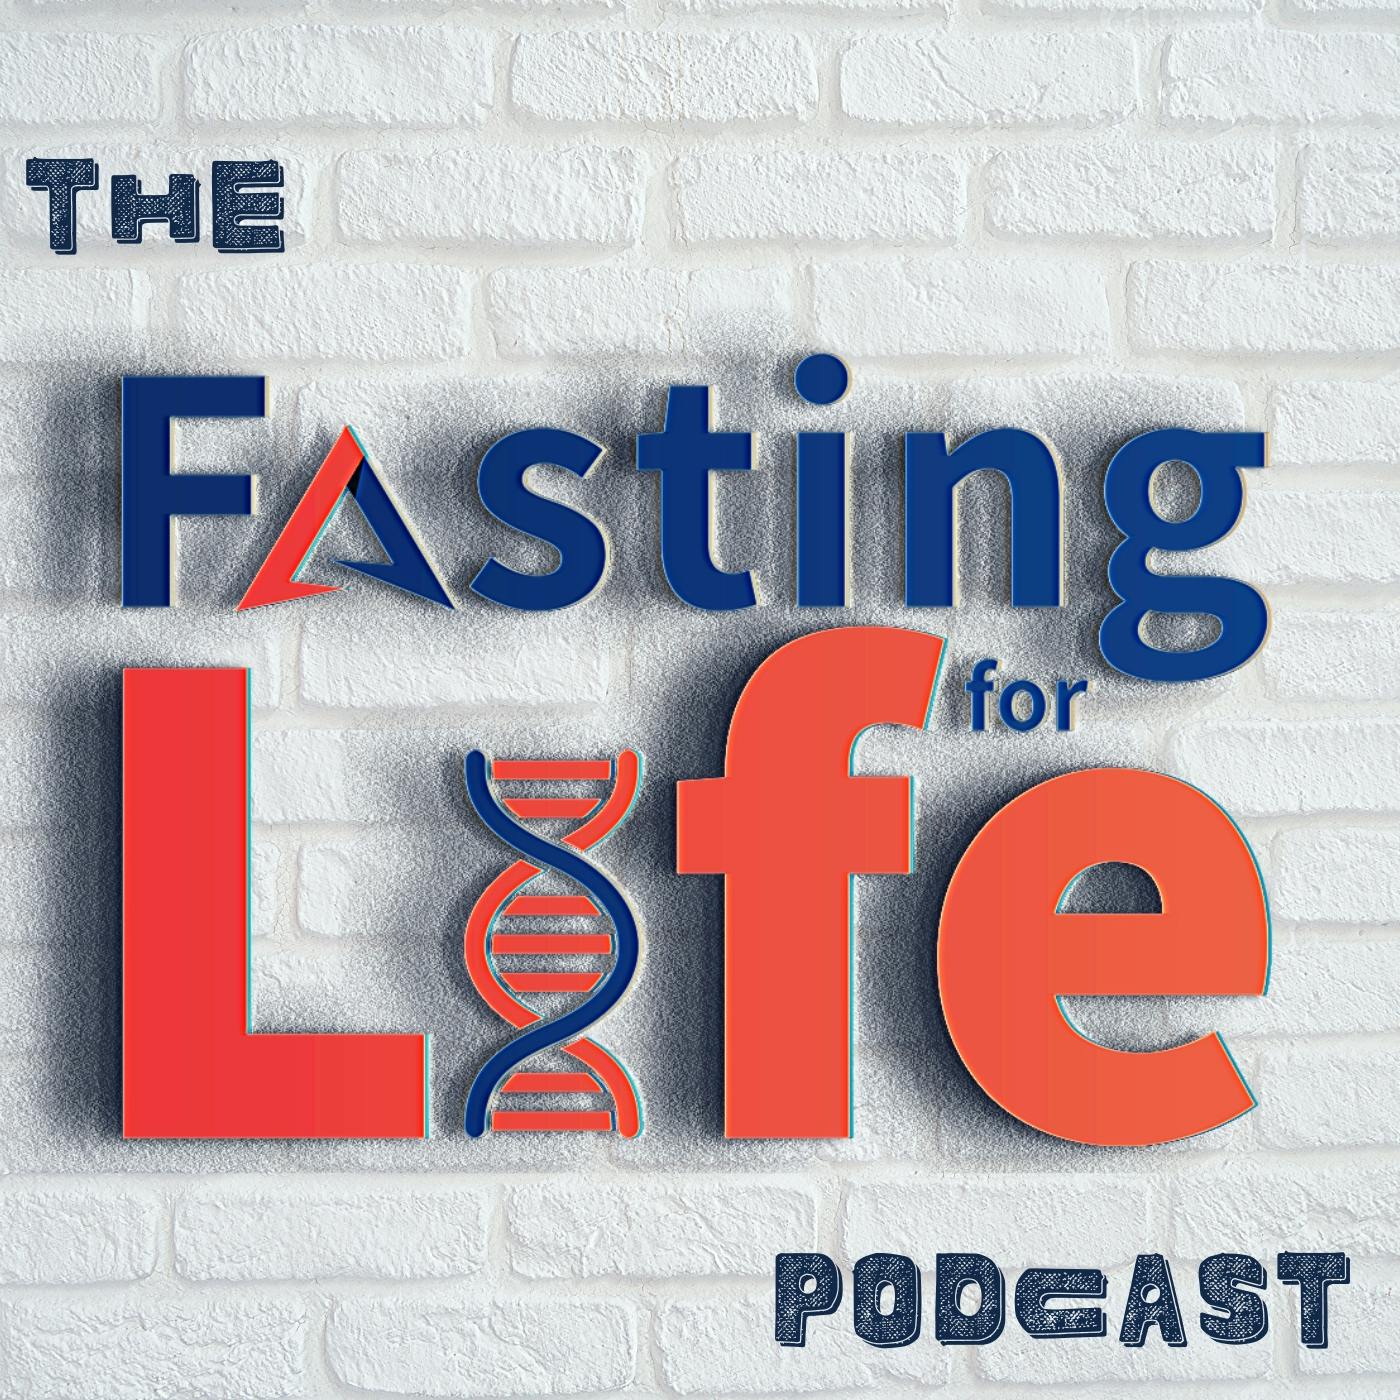 Ep. 187 - Which fasting schedule is the best? | How sleep & stress affect metabolic disease, cravings, fasting success, & fat loss | Leveraging your chronotype, protein & time-restricted eating to low